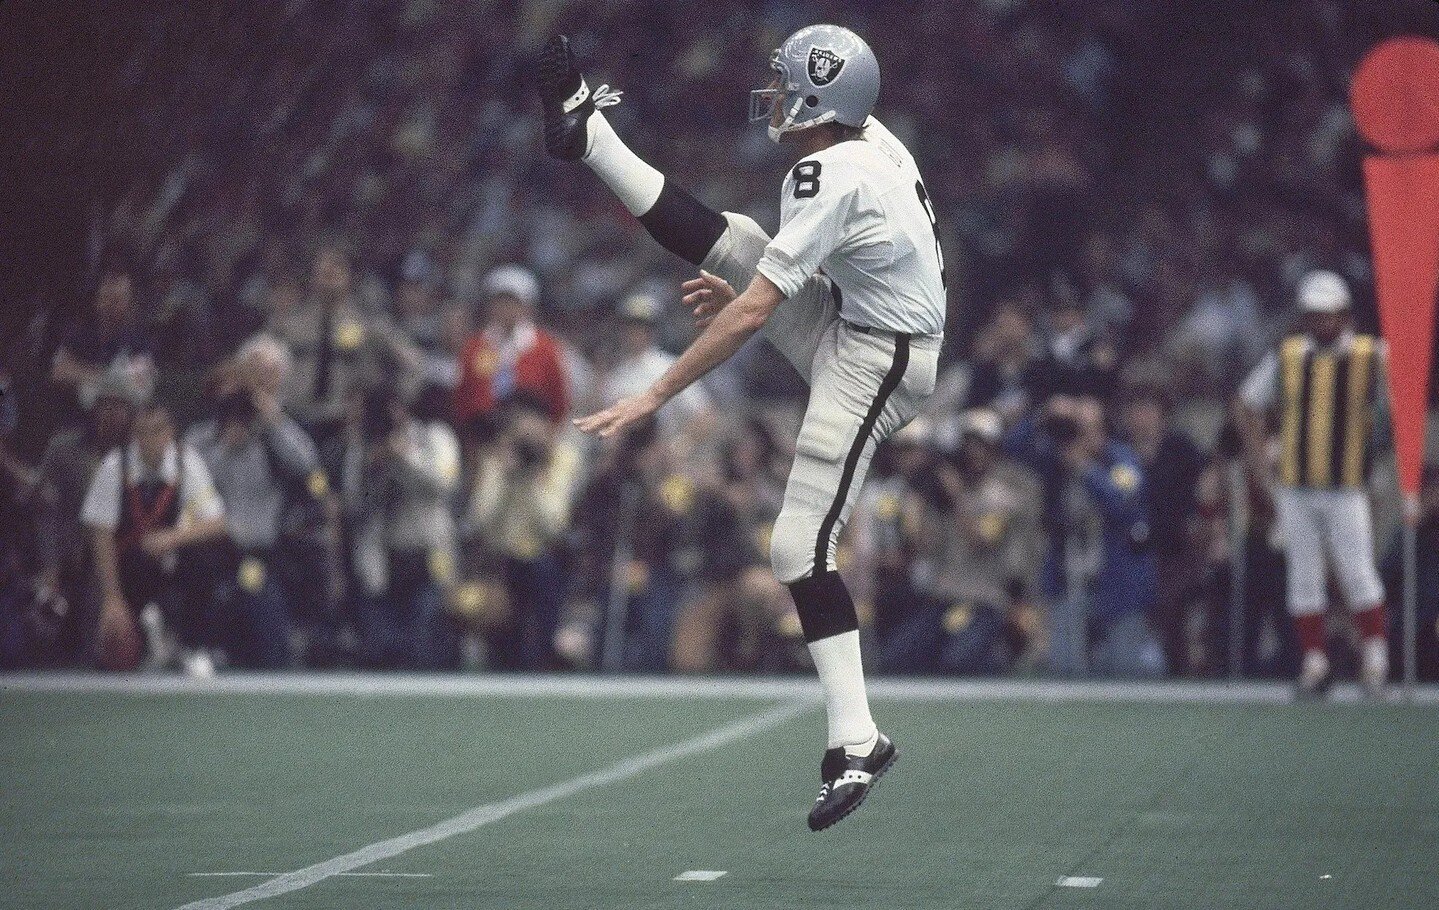 LKMS Salute to Excellence: Ray Guy

Did you know Ray Guy, the first punter ever inducted into the Pro Football Hall of Fame, changed the game forever with his incredible hang time? His punts were so legendary that the NFL began including hang time as